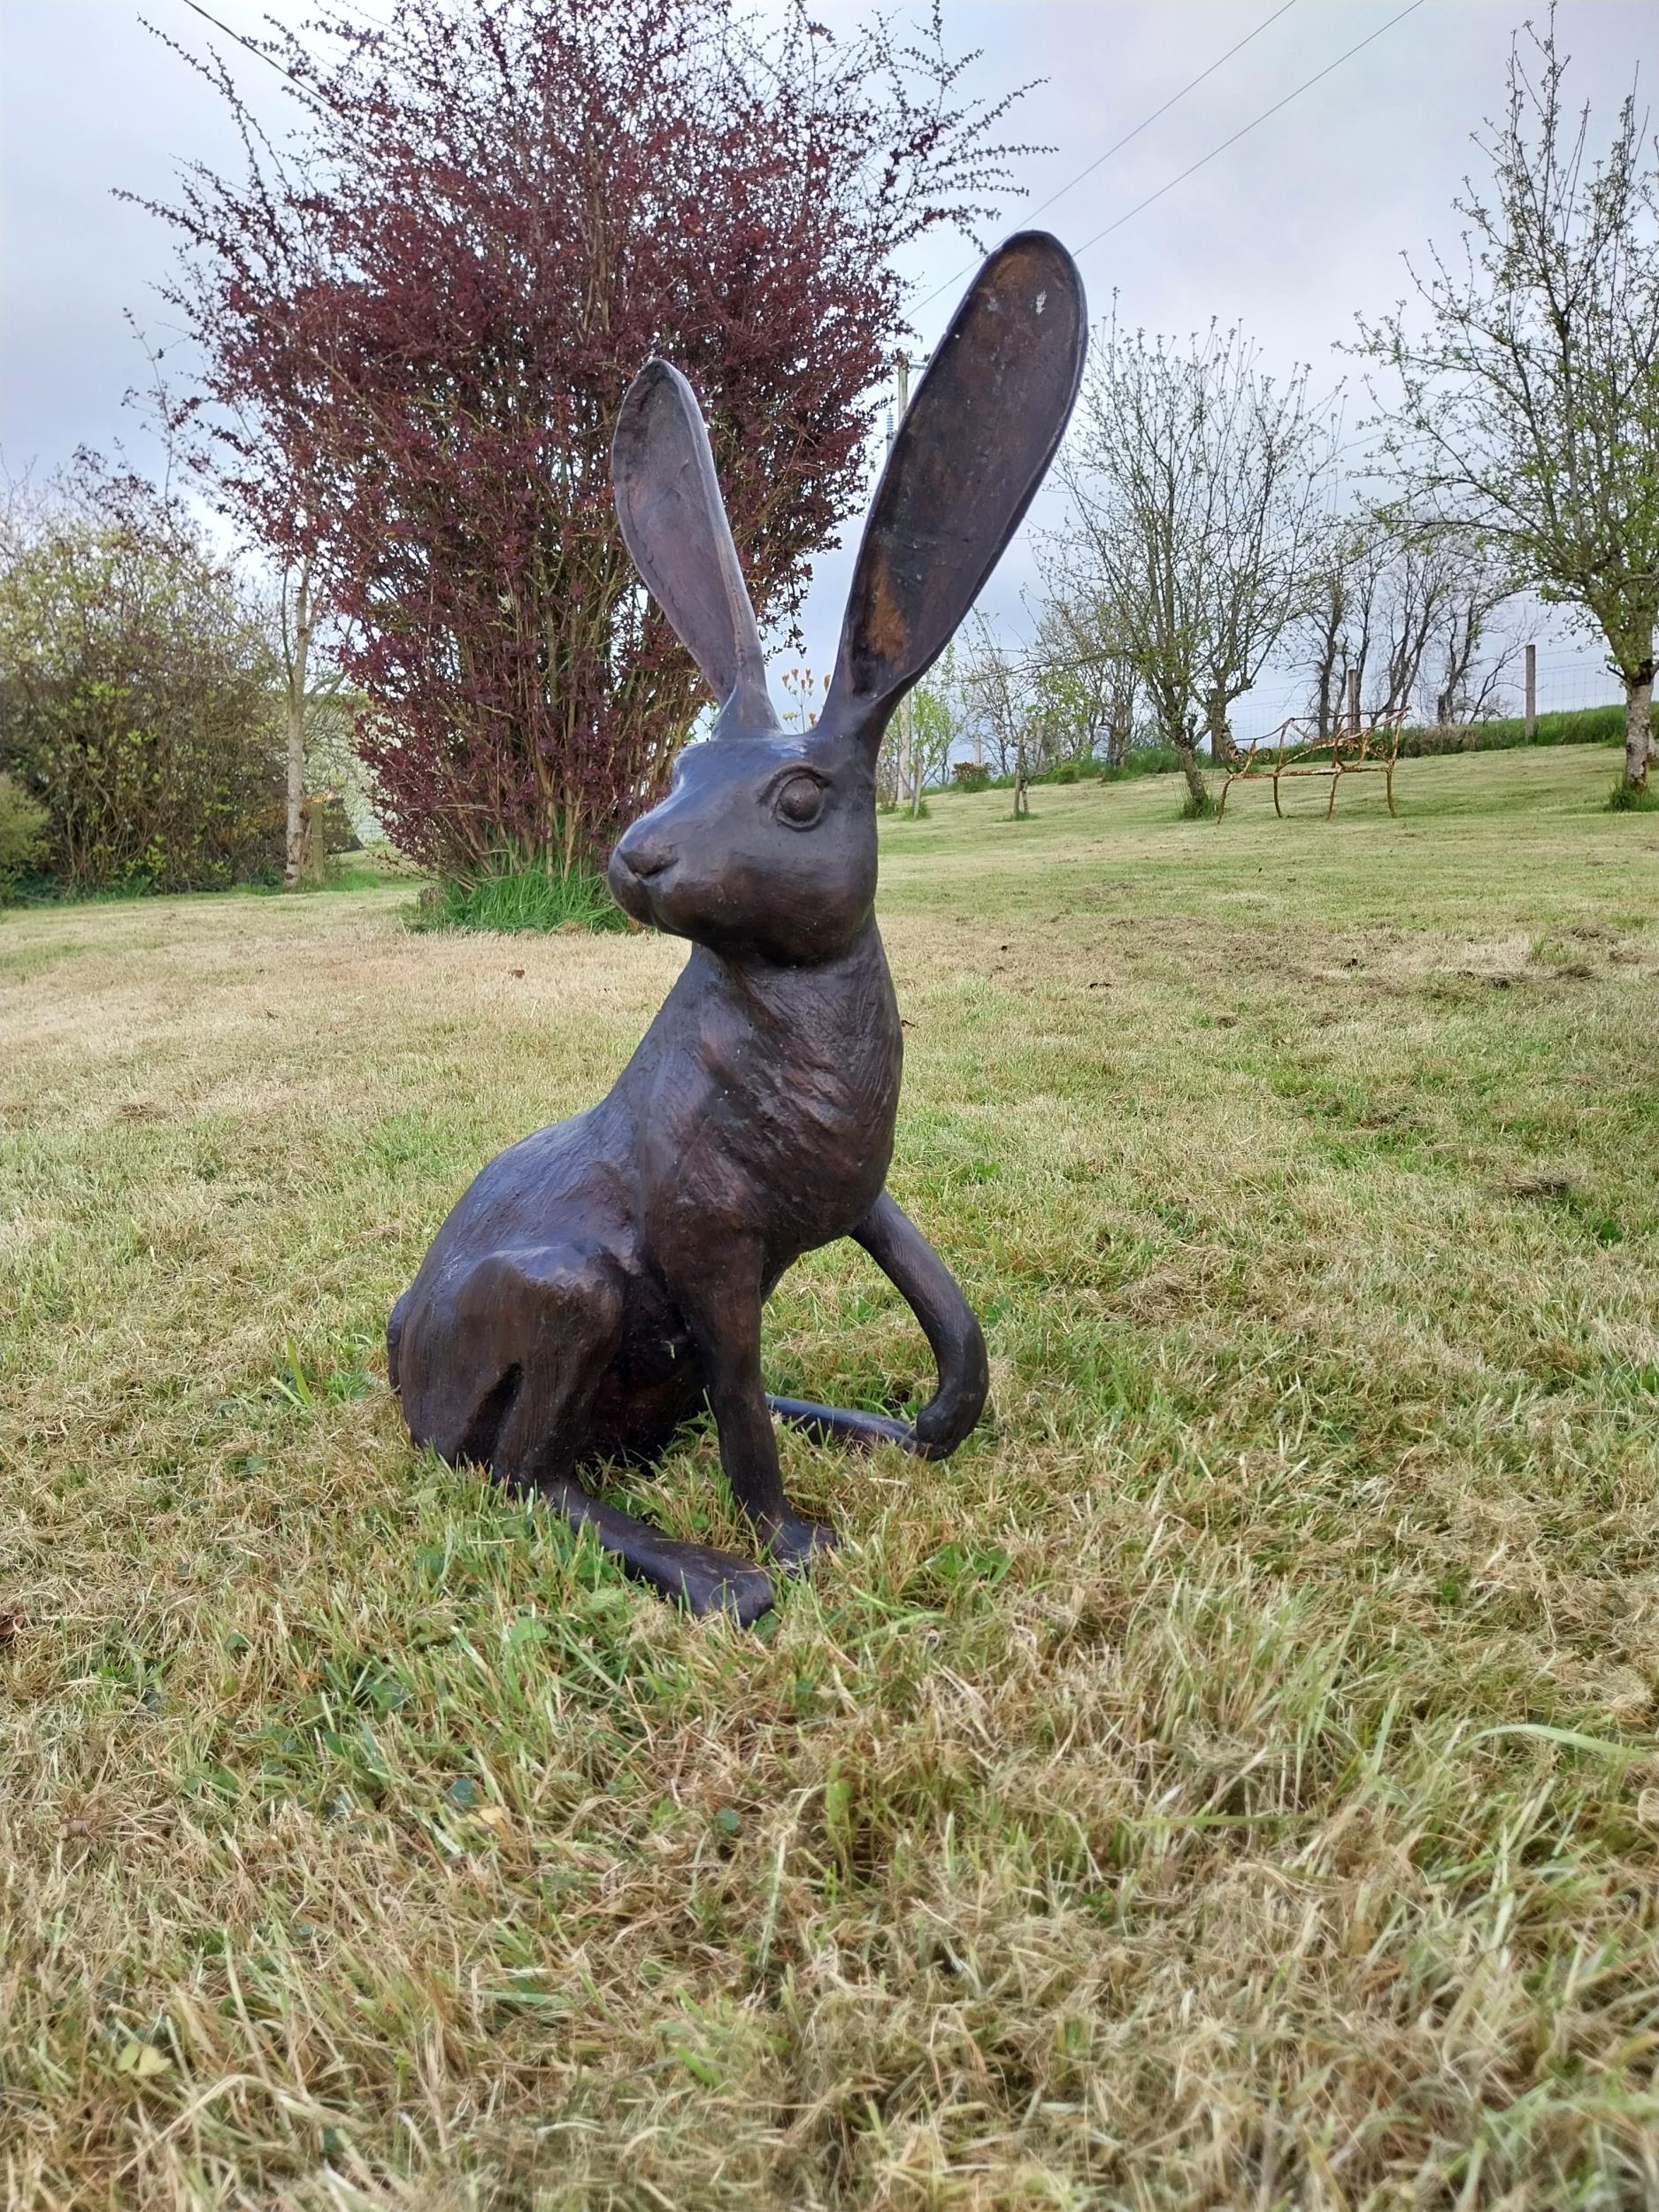 Exceptional quality bronze statue of a seated Hare with ears up {61 cm H x 35 cm W x 20 cm D}. - Image 3 of 6